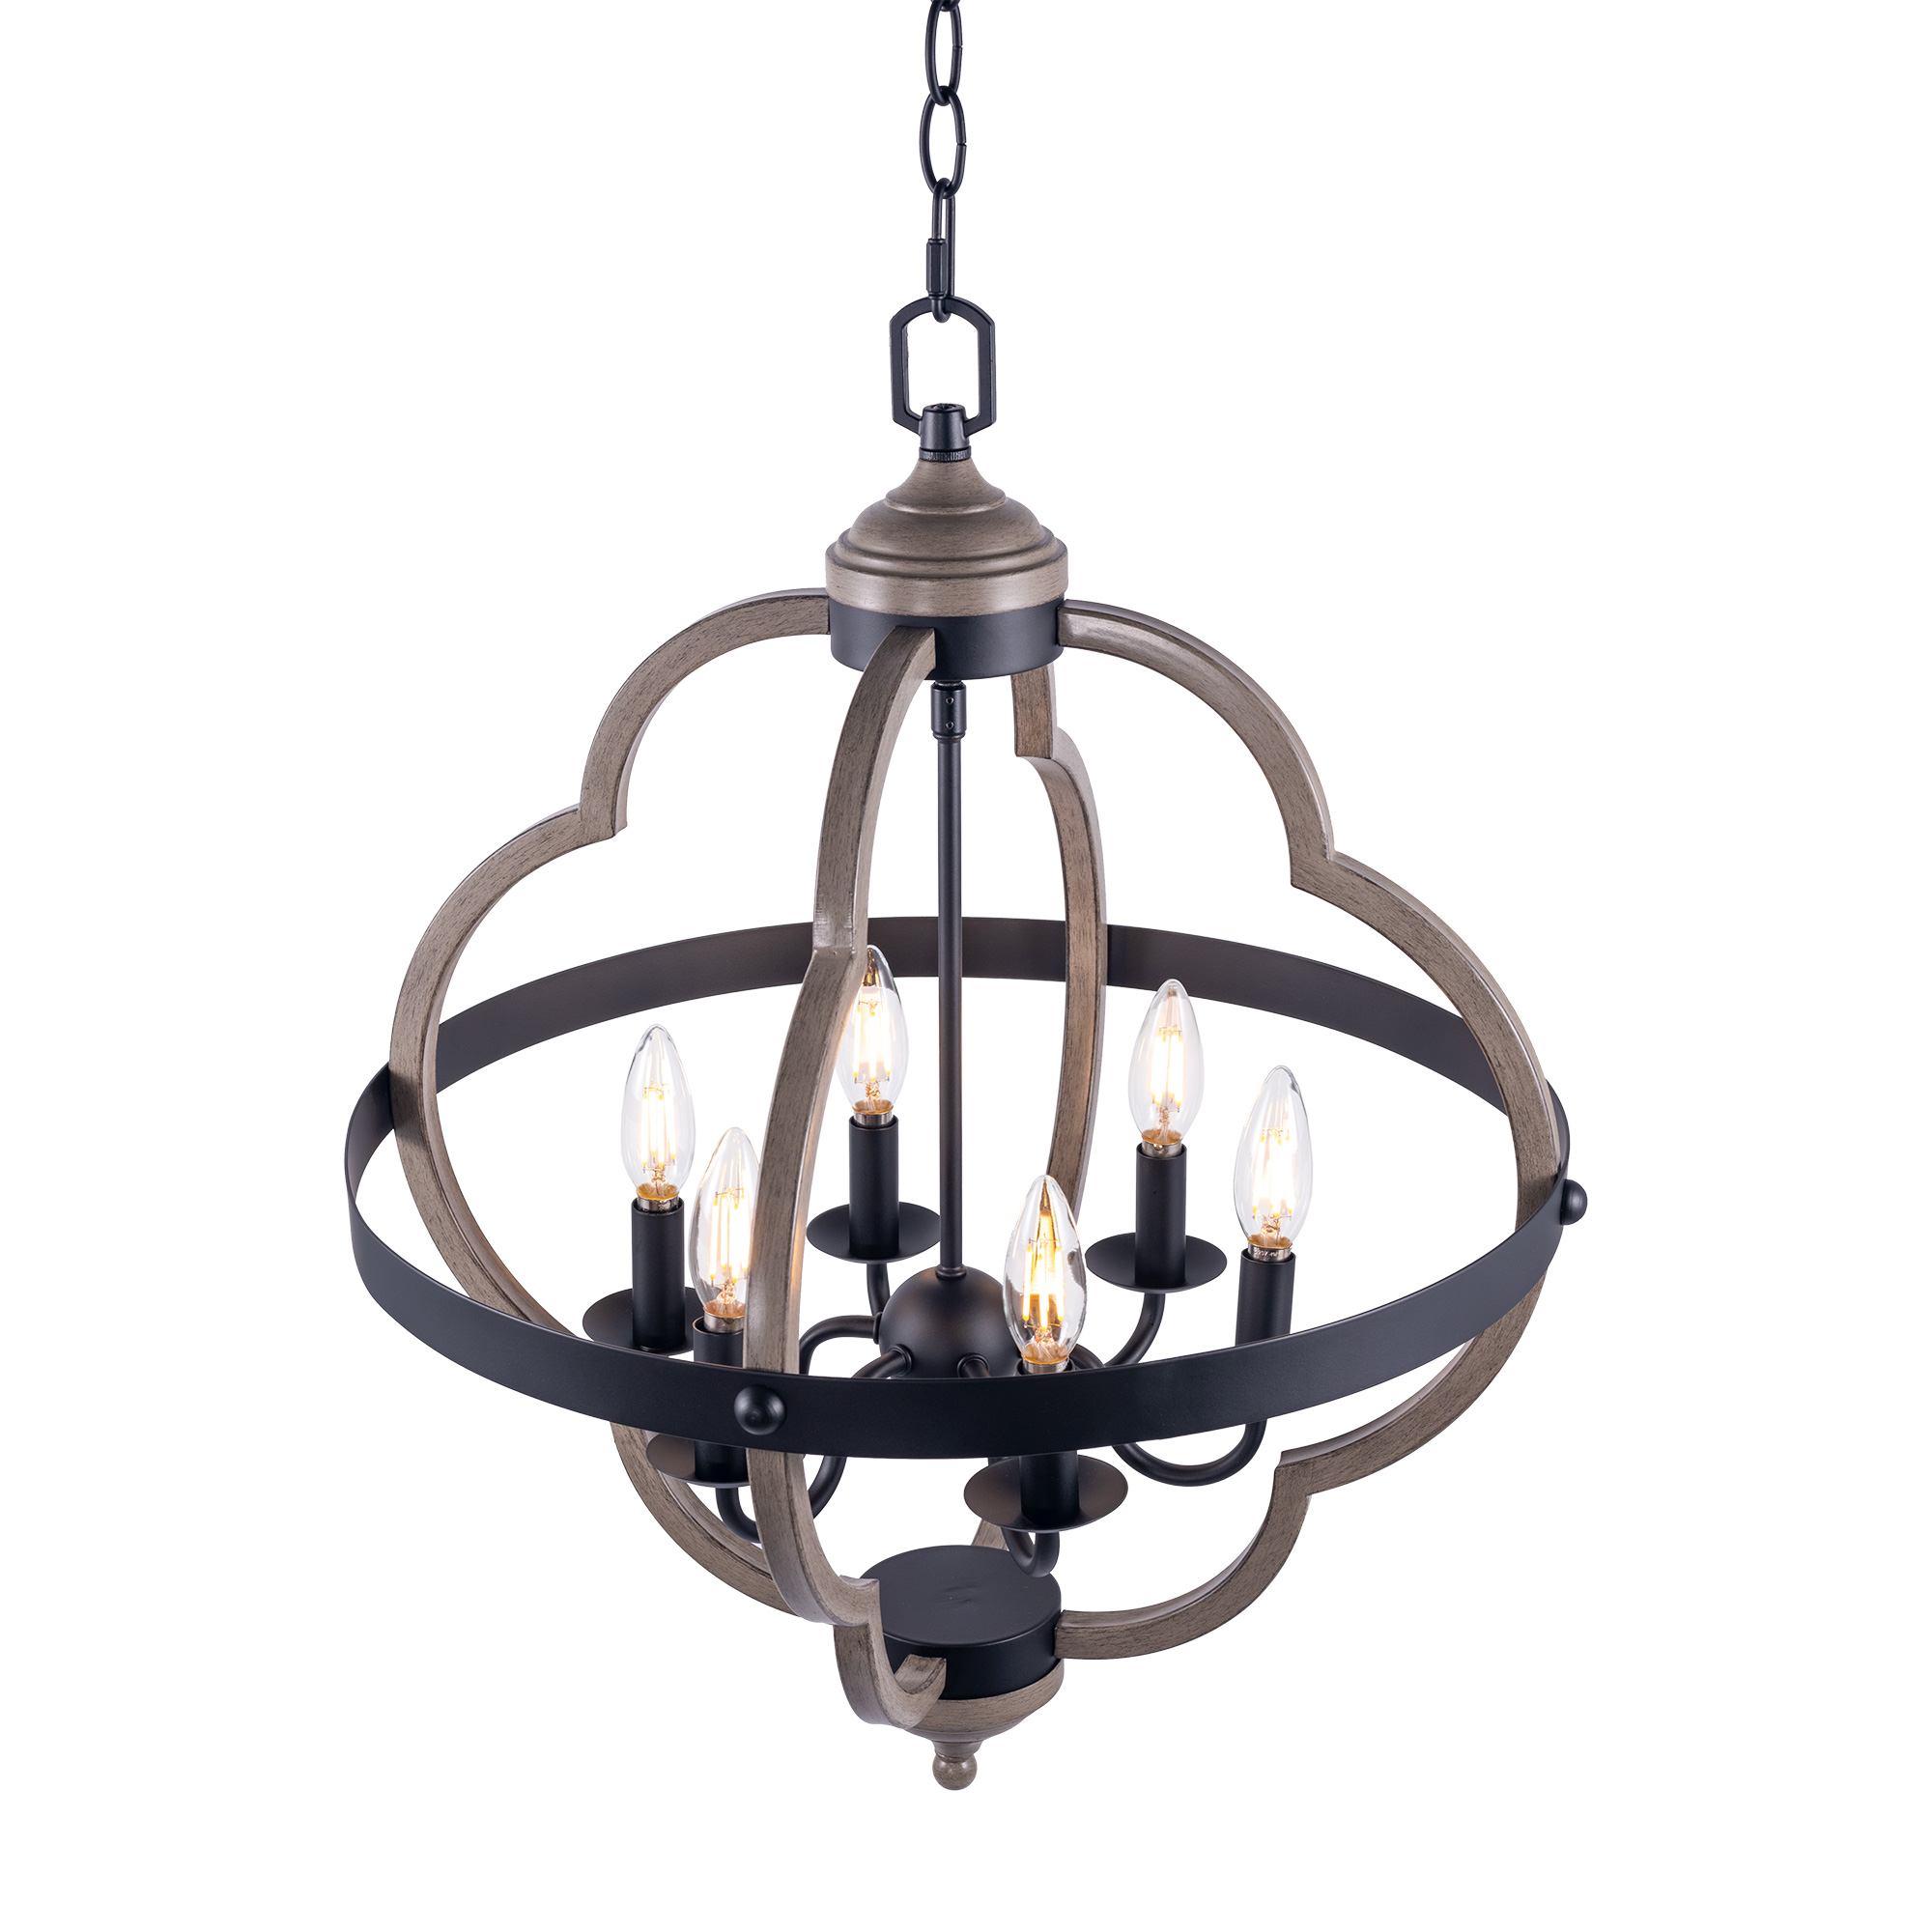 USA-Direct-6-Light-Candle-Style-Geometric-Chandelier-Industrial-Rustic-Indoor-Pendant-Light-Without--1877127-5